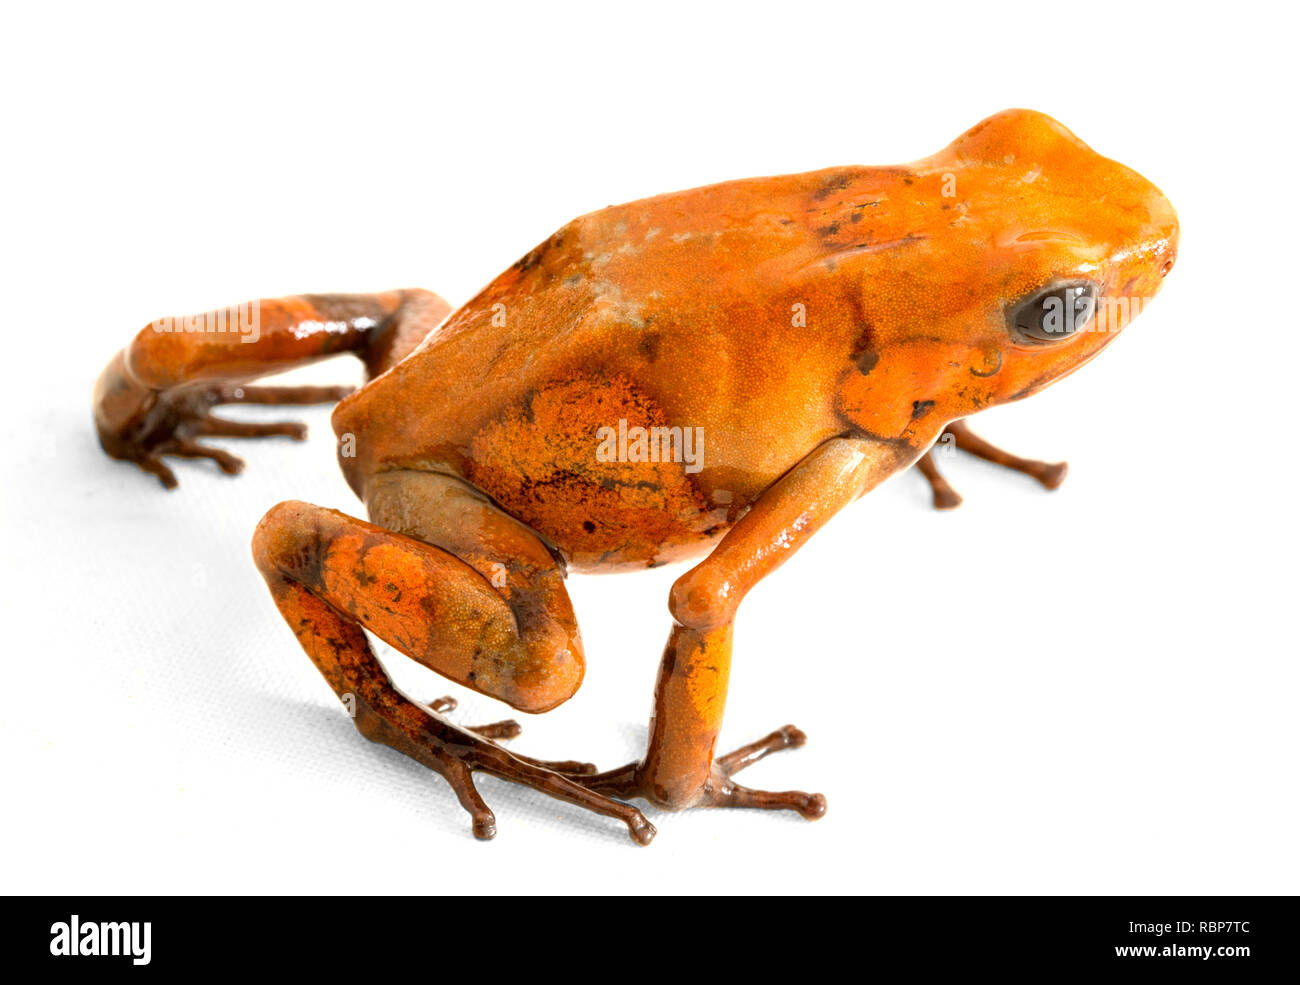 poison dart frog Oophaga histrionica on white from the tropical rain forest of Colombia. A poisonous small jungle animal. Stock Photo